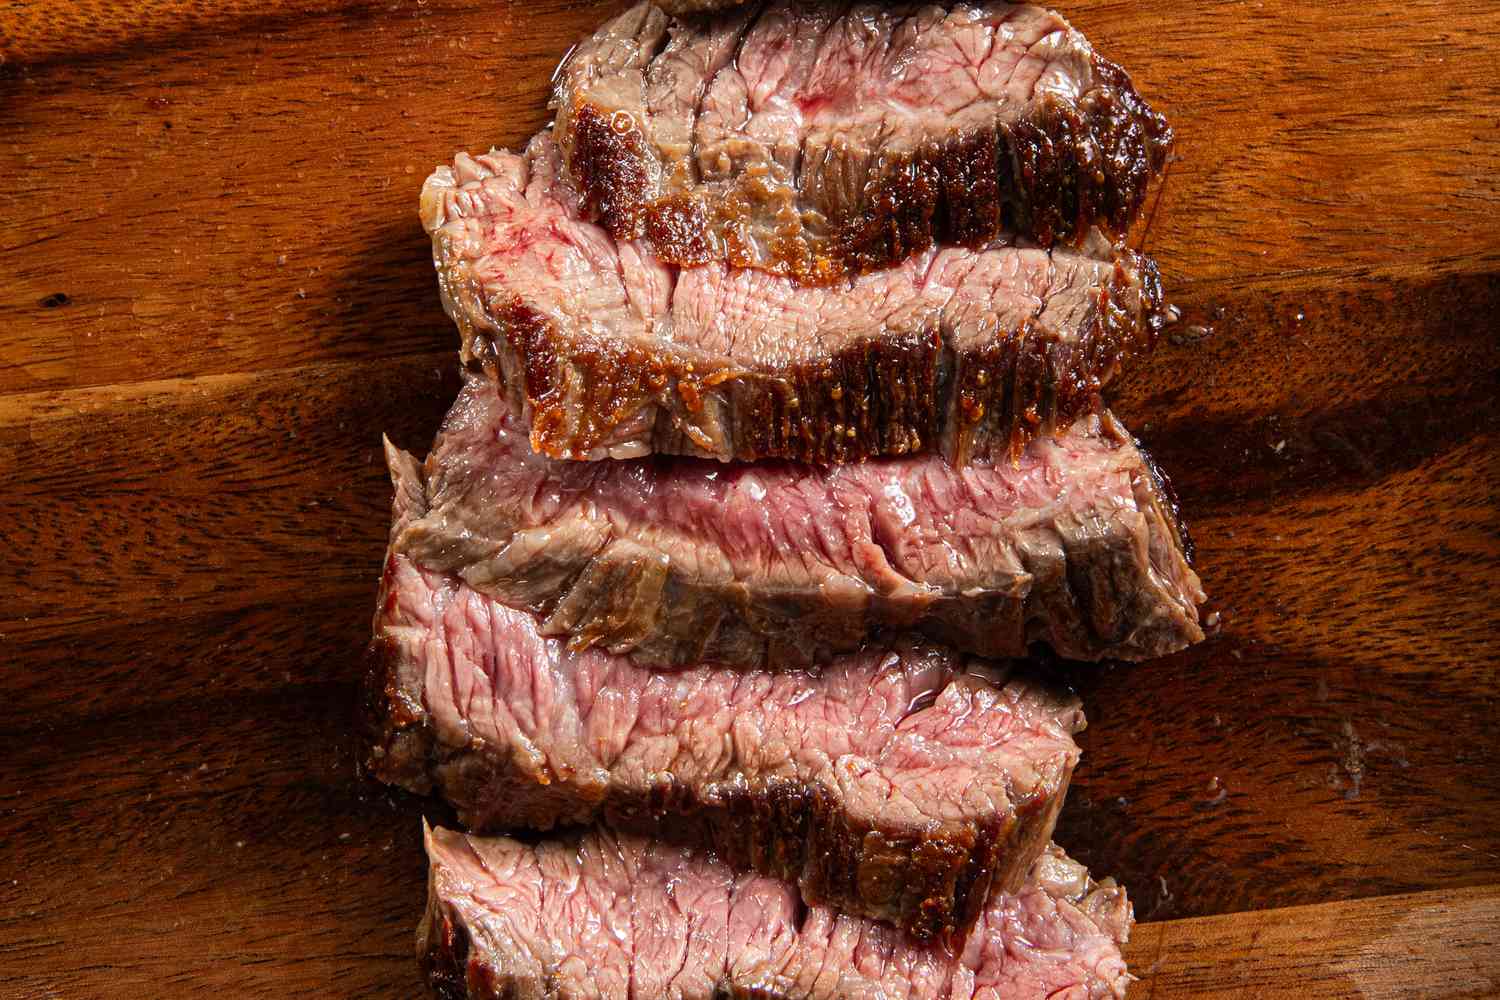 A piece of medium-rare steak sliced into thin pieces on a wooden cutting board.